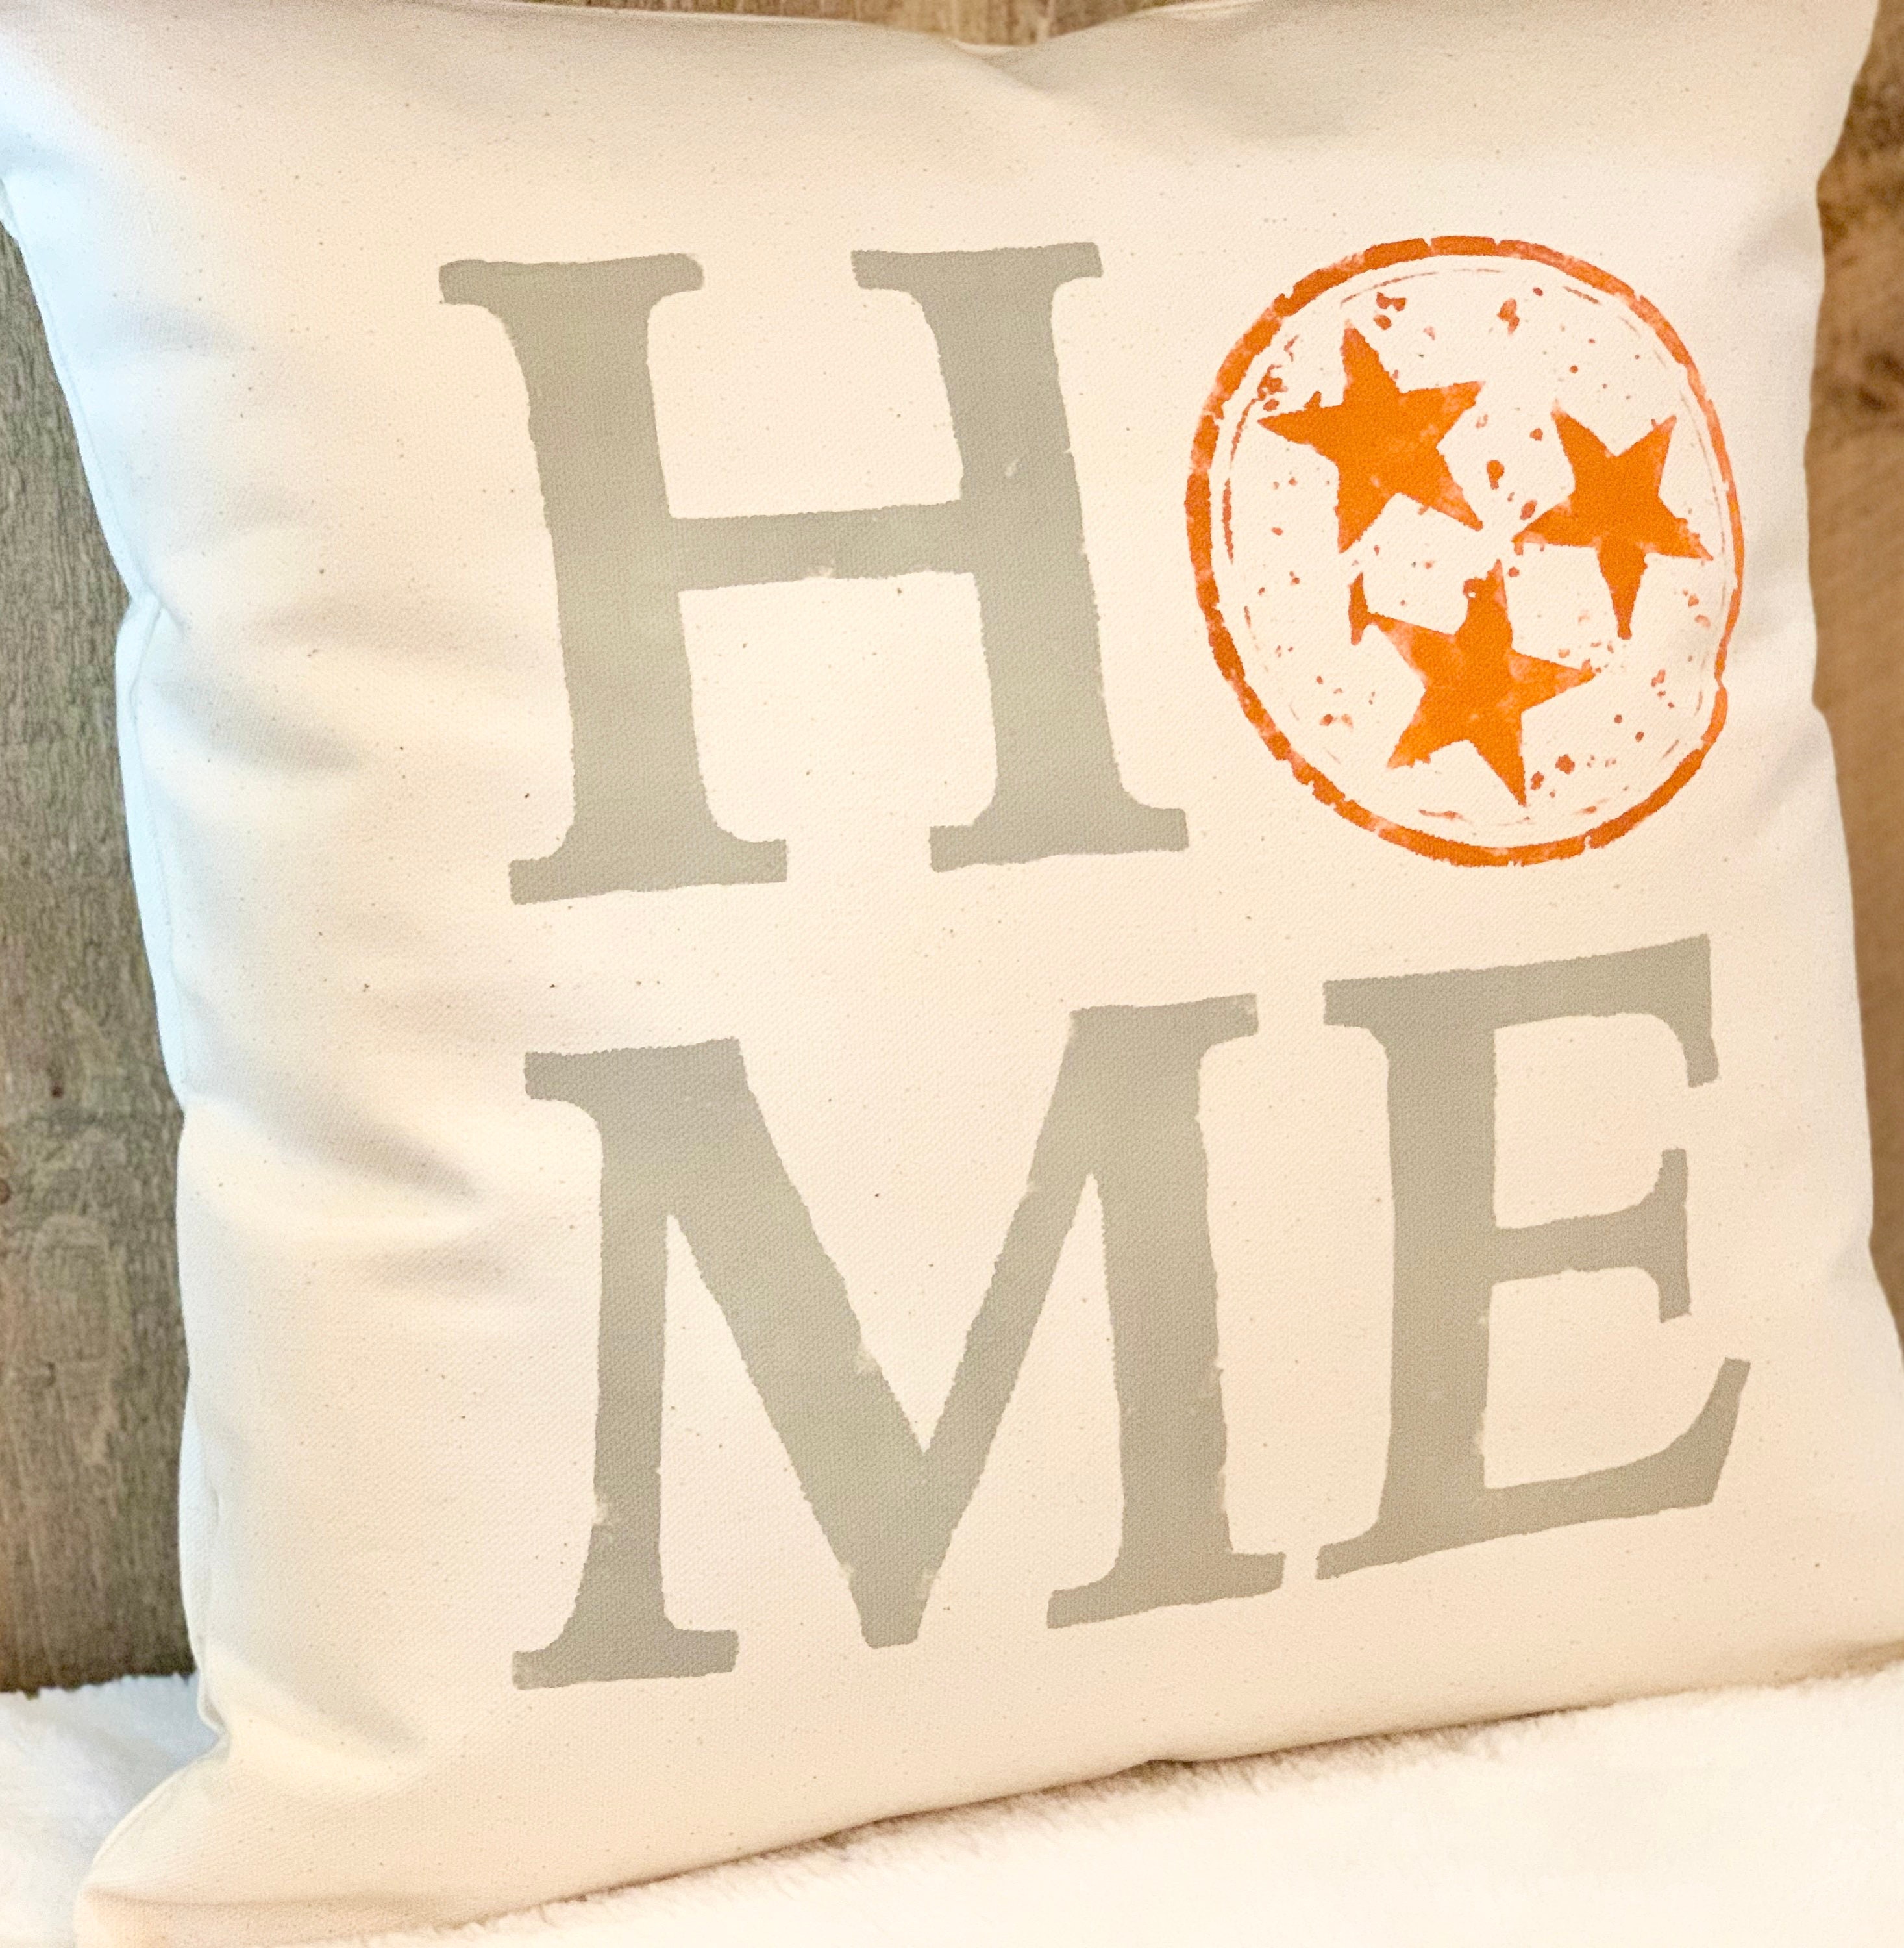 Farmhouse Pillows Nashville Tennessee Rustic Throw Pillow or Cover Rustic  Decor Gifts for Her Personalized Gifts 